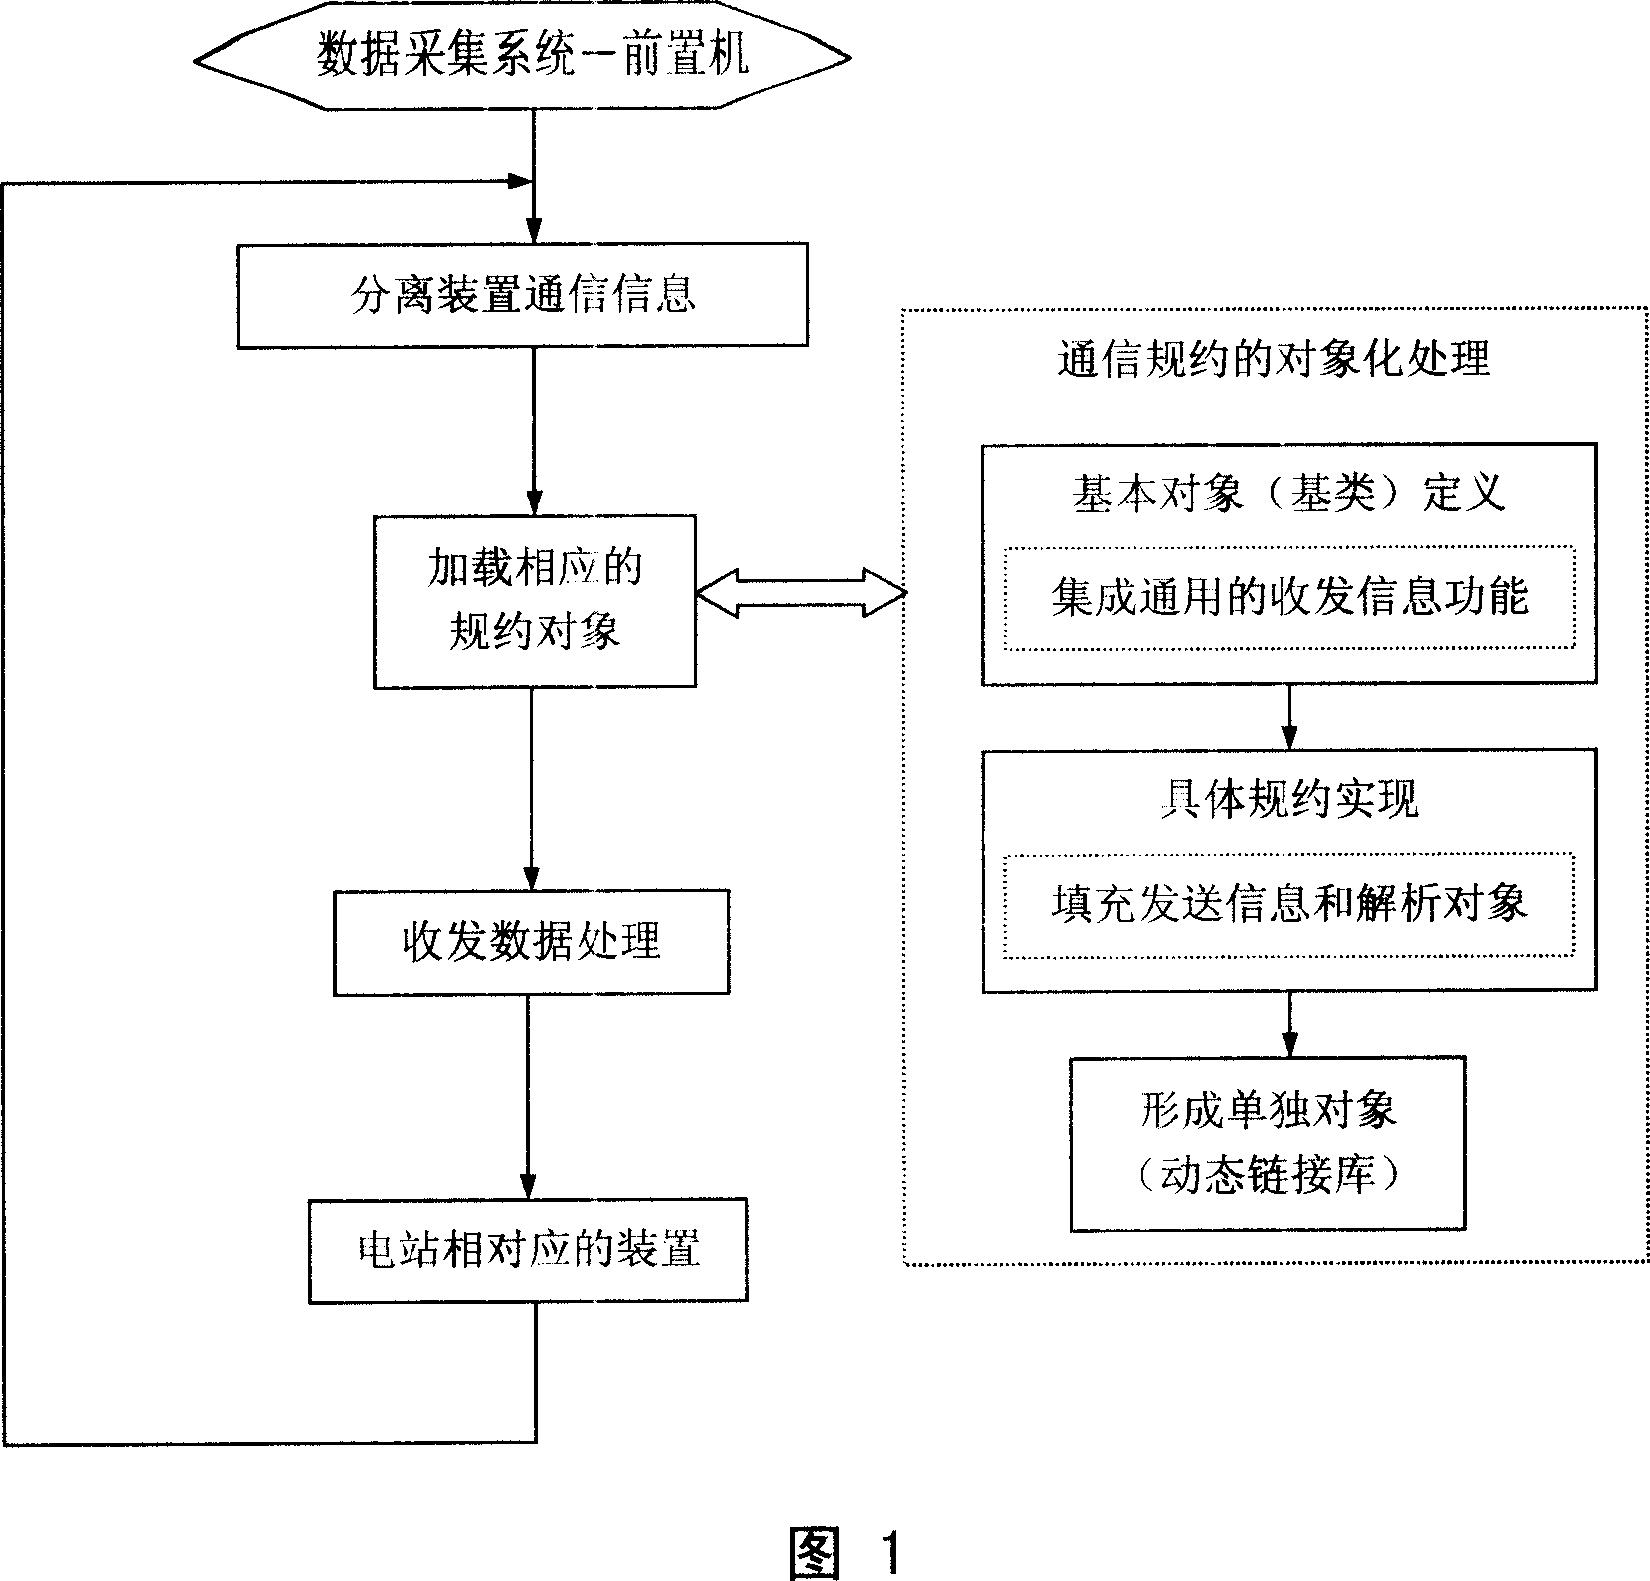 Power station communication system and its reduction procedure implement method